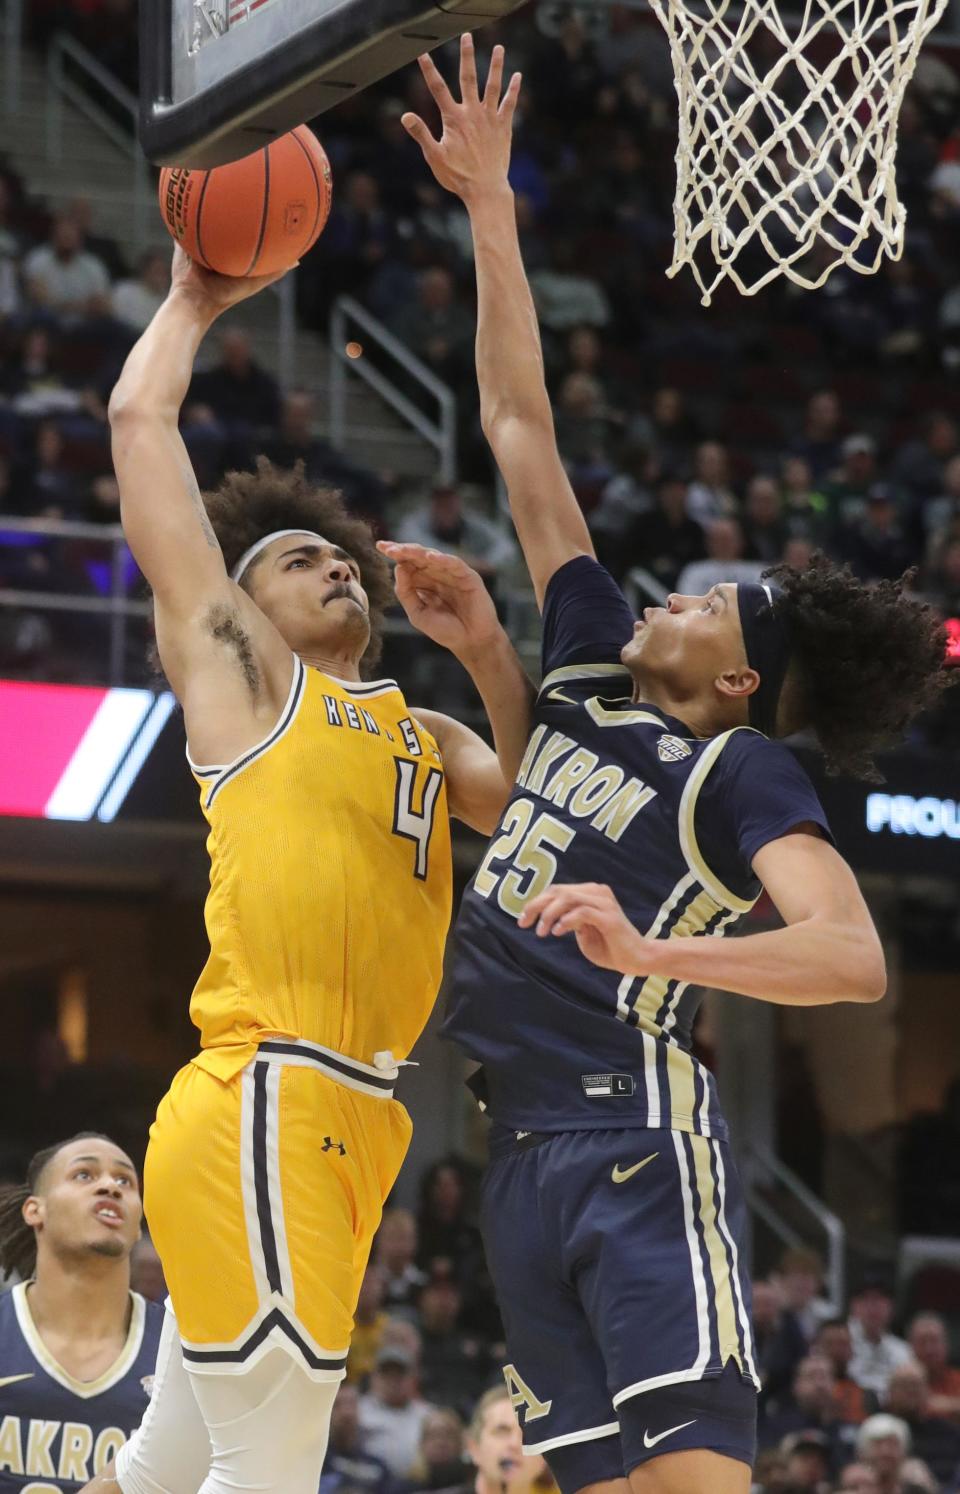 Kent State's Chris Payton puts up a shot as Akron's Enrique Freeman defends in a MAC quarterfinal March 10, 2023, in Cleveland.